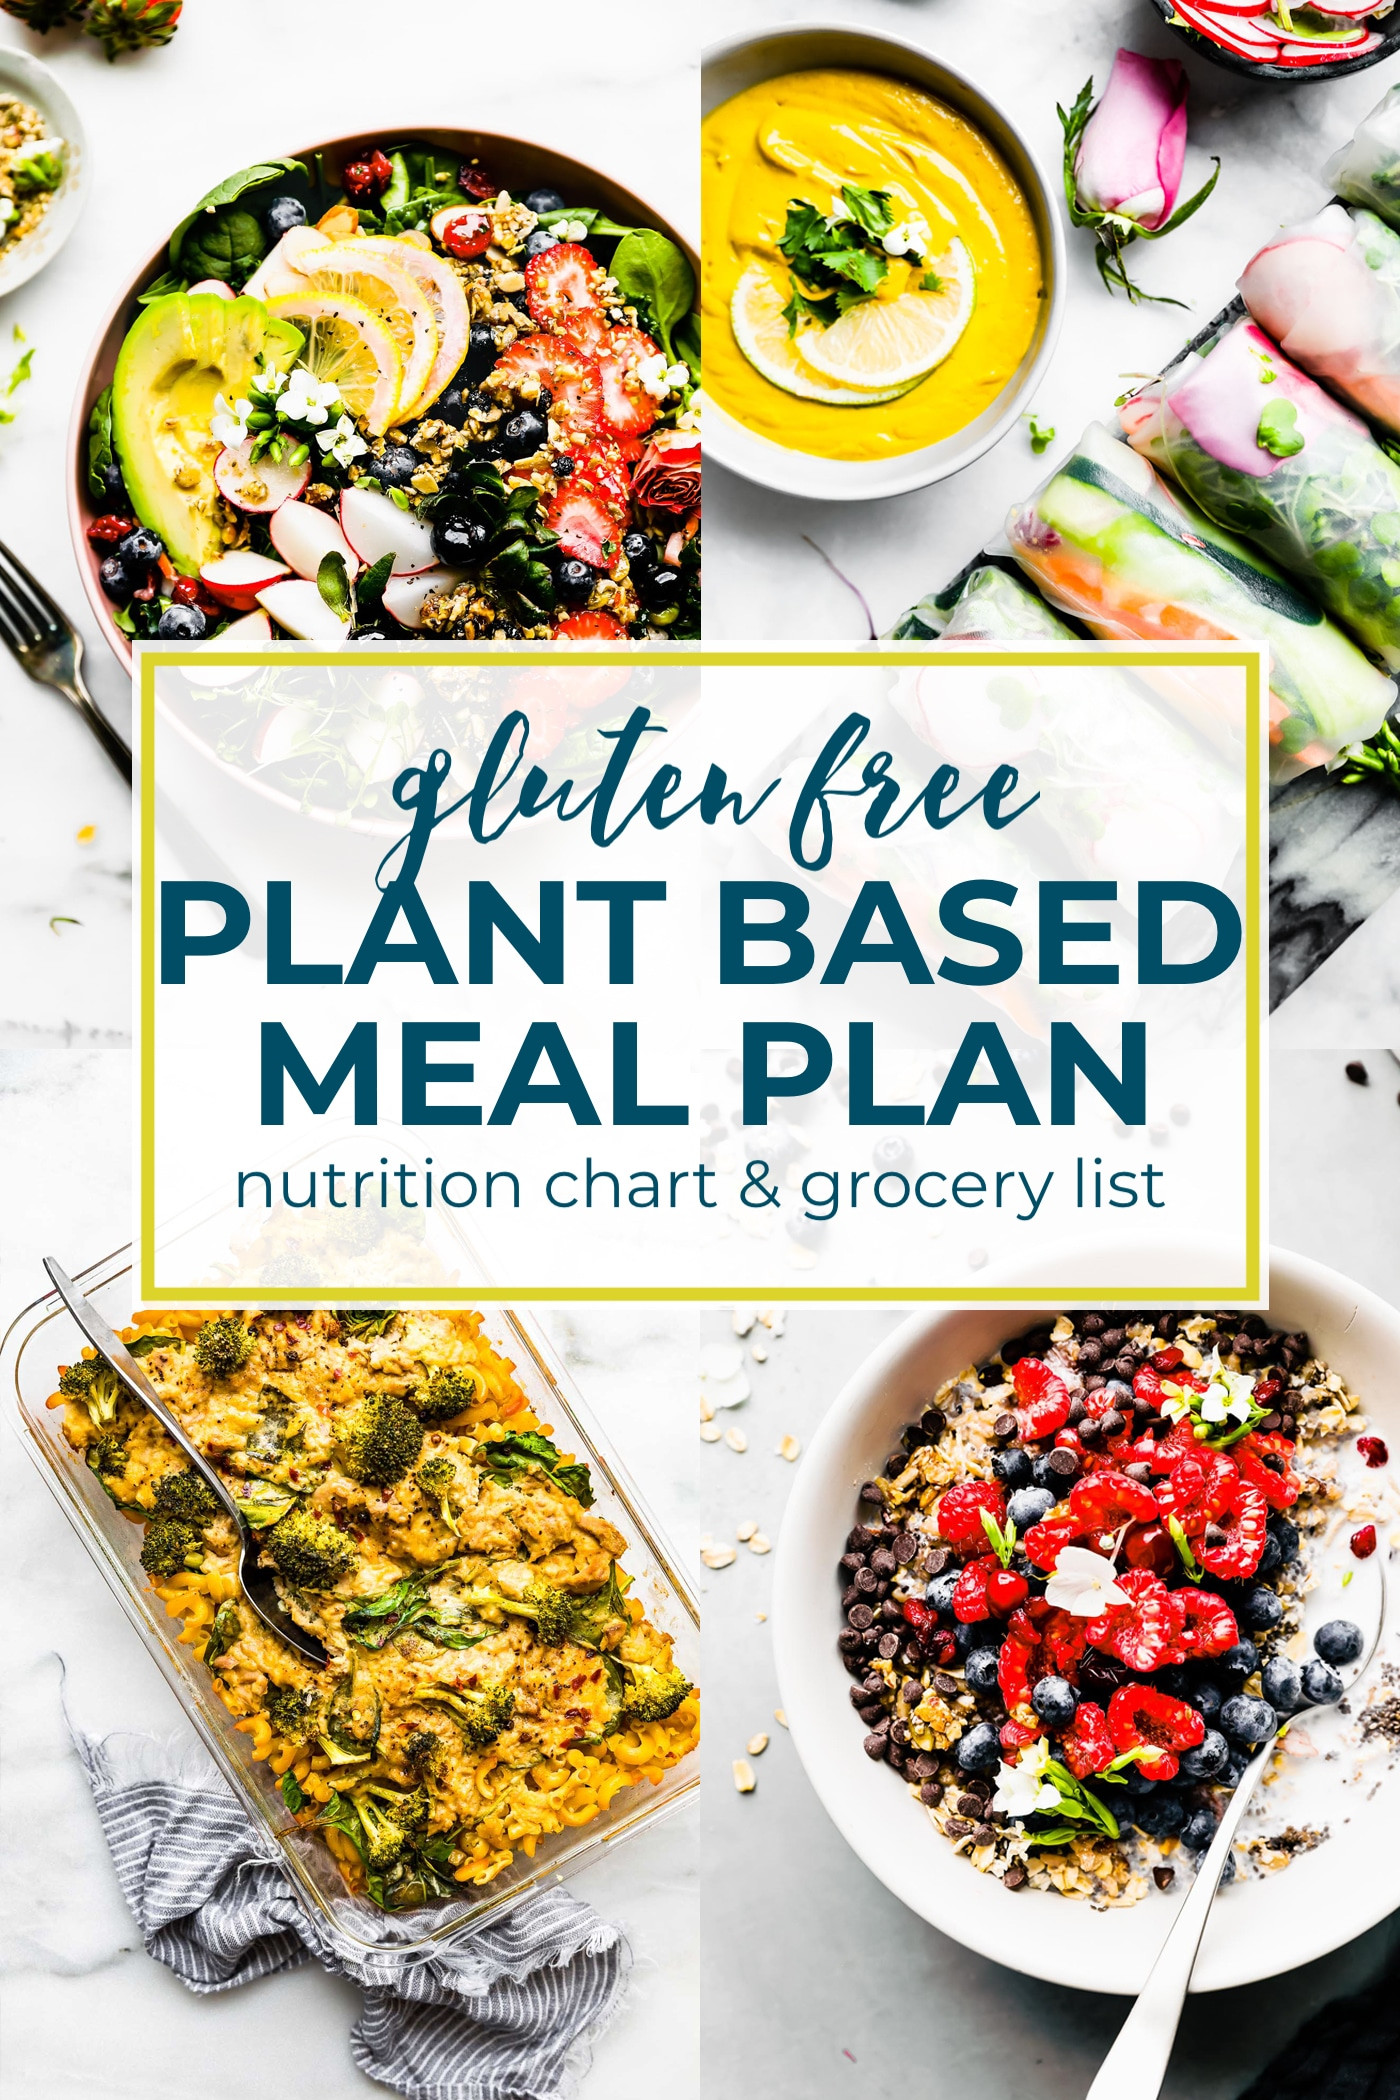 Plant Based Diet Meal Plan Shopping Lists
 Plant Based Foods Meal Plan and Grocery Shopping List